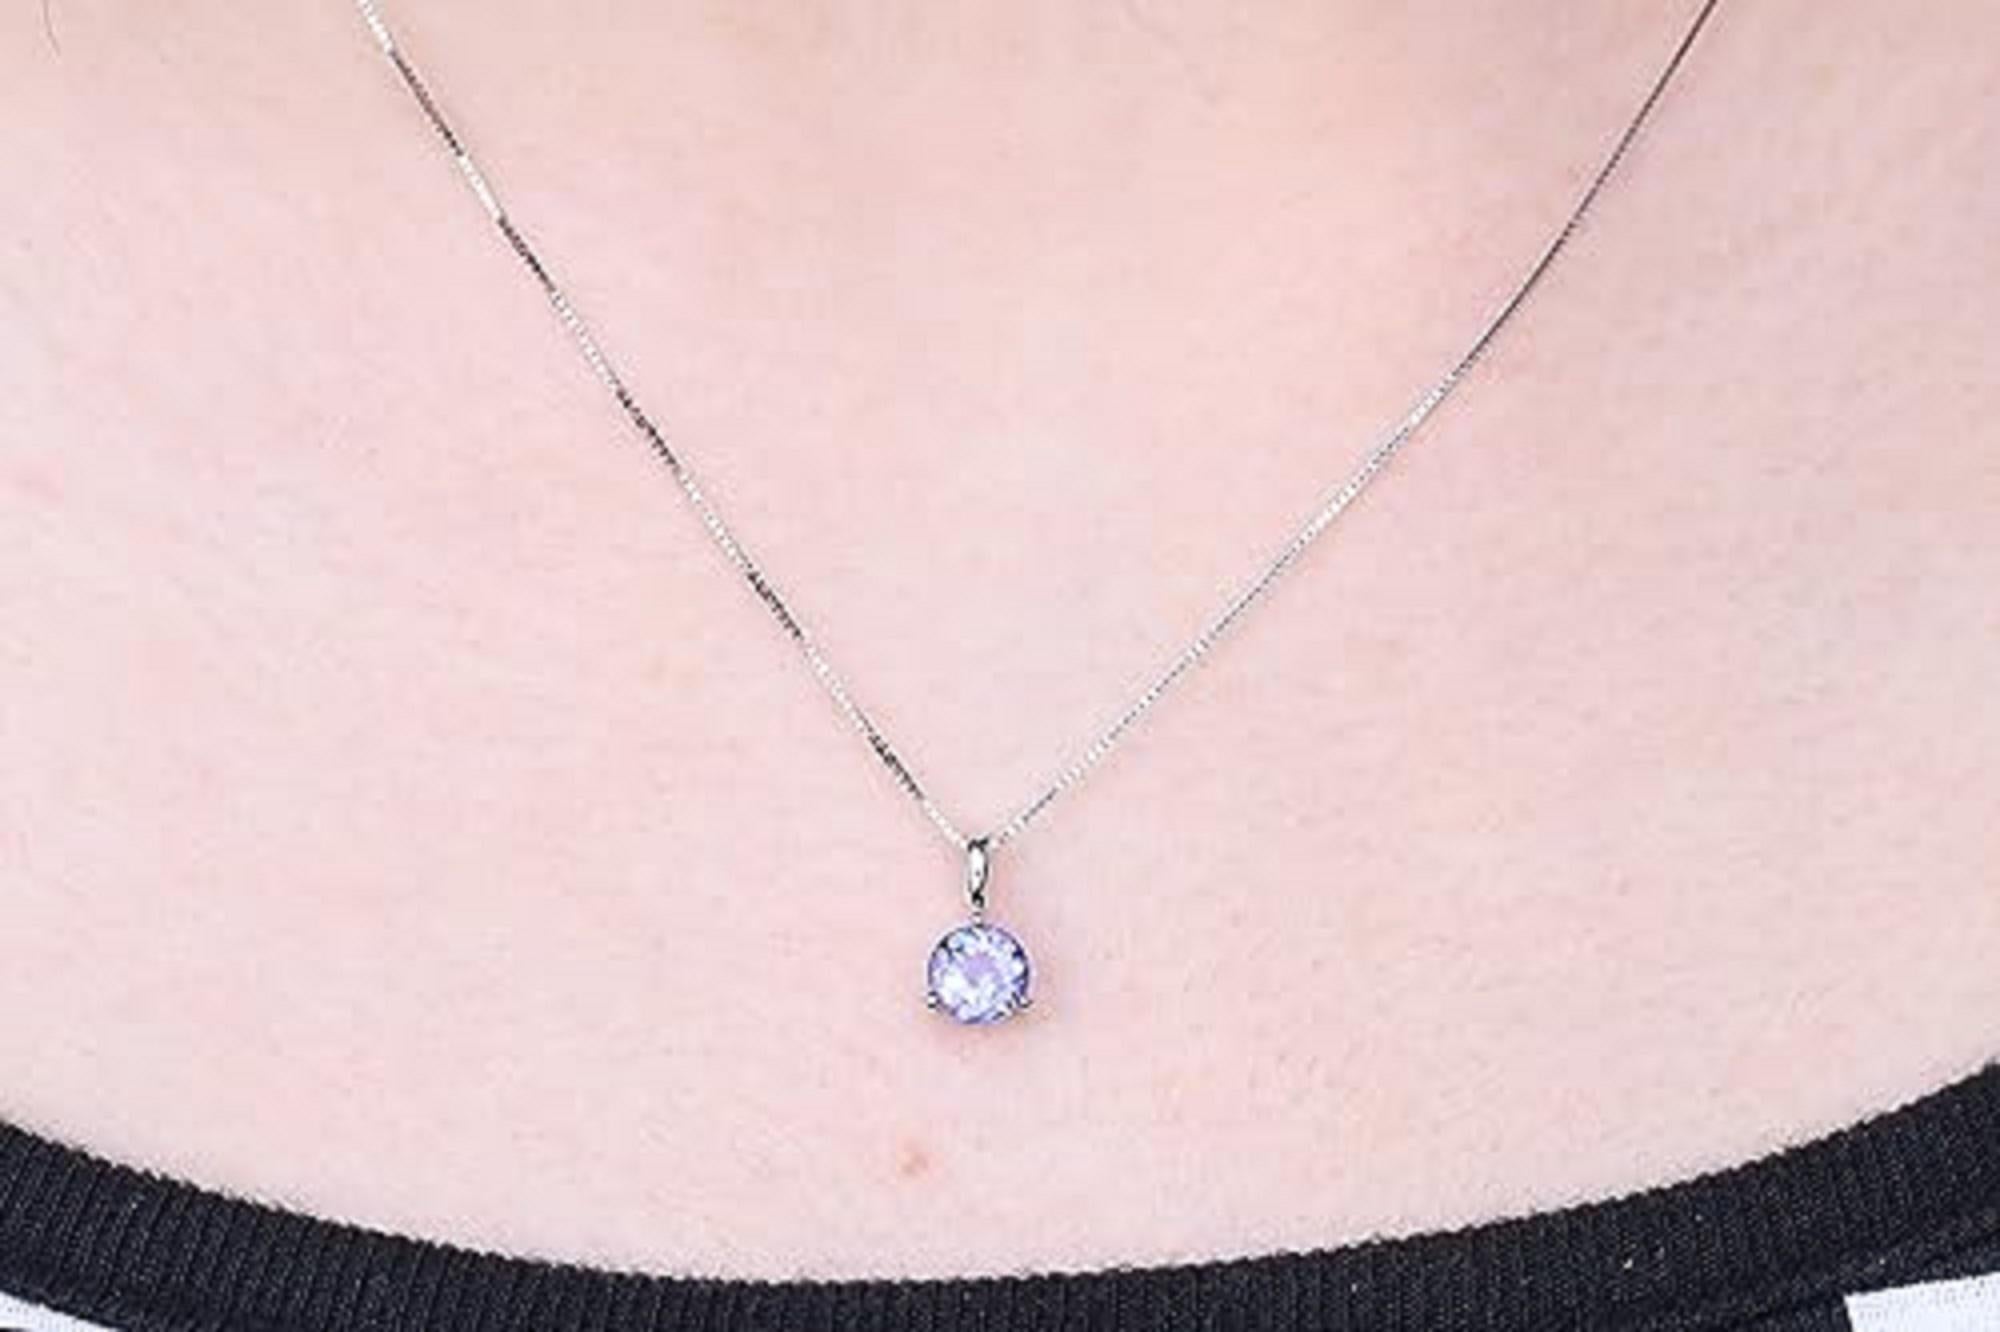 Decorate yourself in elegance with this Pendant is crafted from 10-karat White Gold by Gin & Grace. This Pendant is made up of 6.0 Round-cut Tanzanite (1 Pcs) 0.77 carat . This Pendant is weight 0.340 grams. This delicate Pendant is polished to a